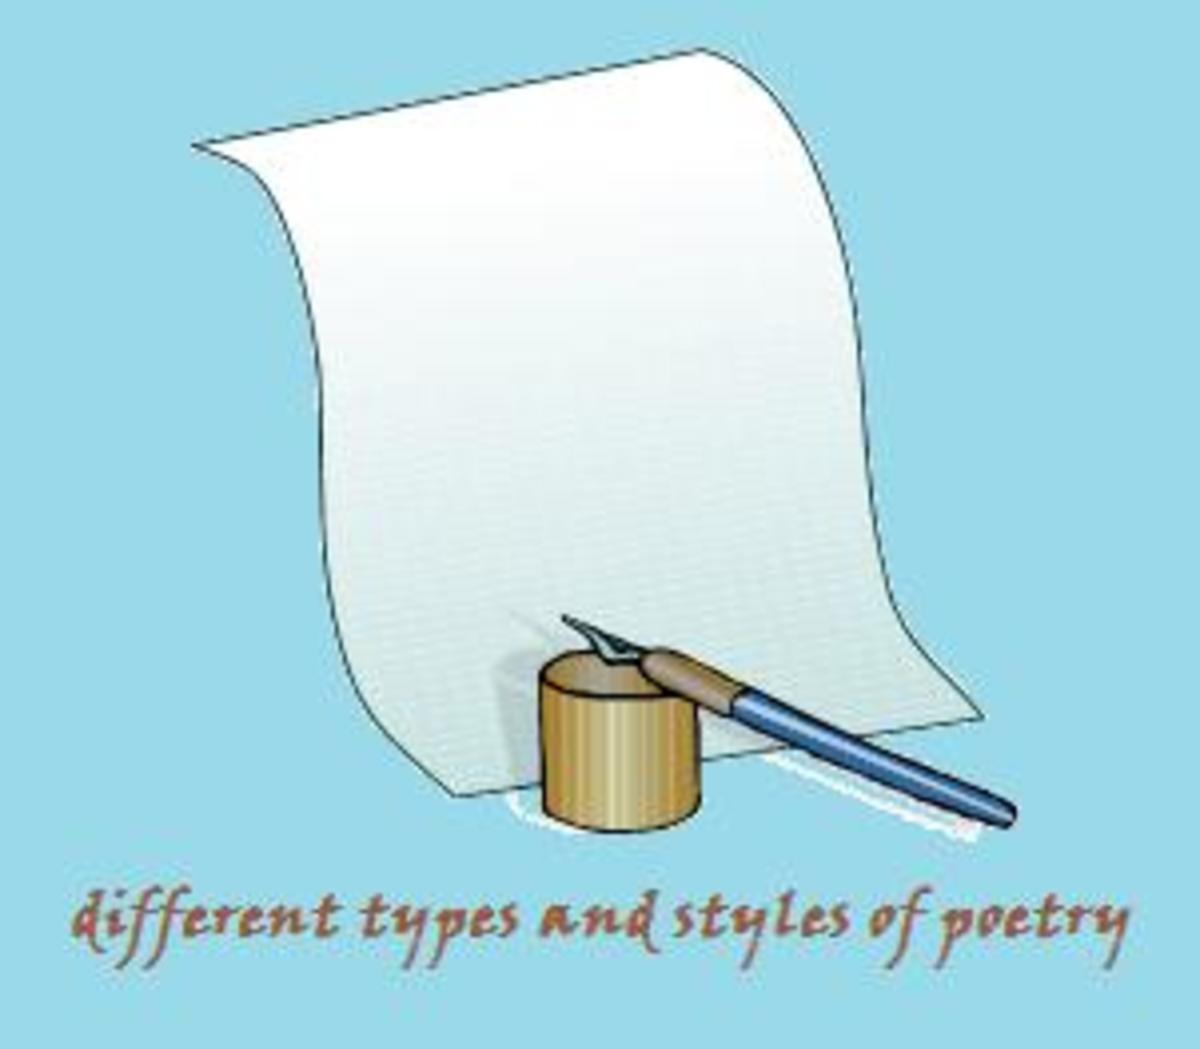 different forms and styles of poetry